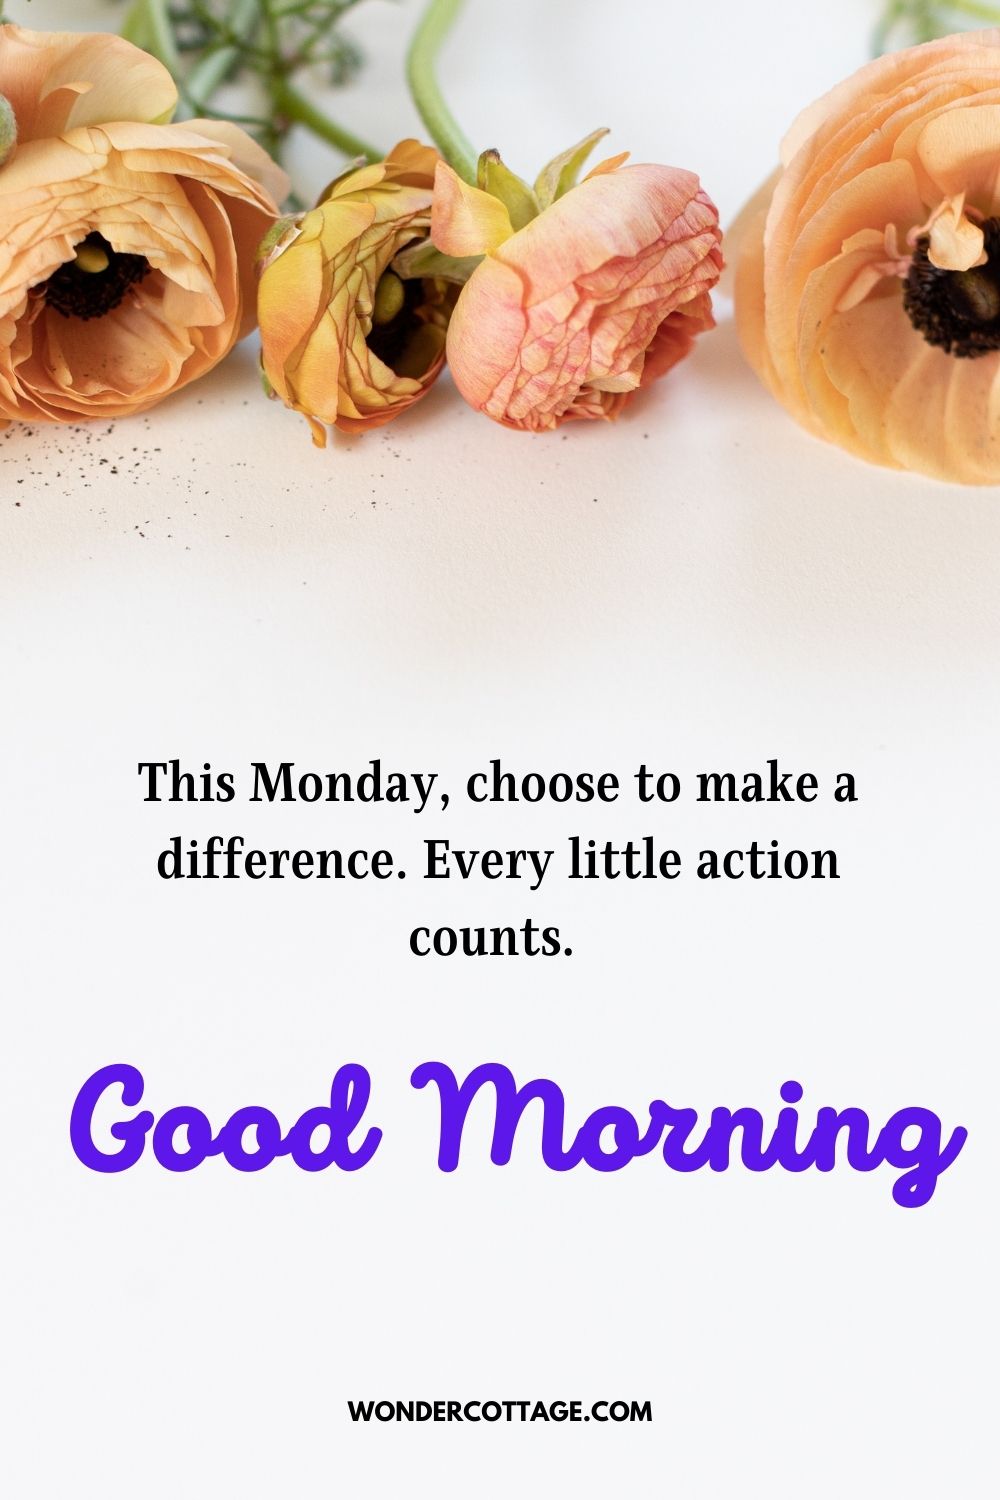 This Monday, choose to make a difference. Every little action counts. Good Morning!